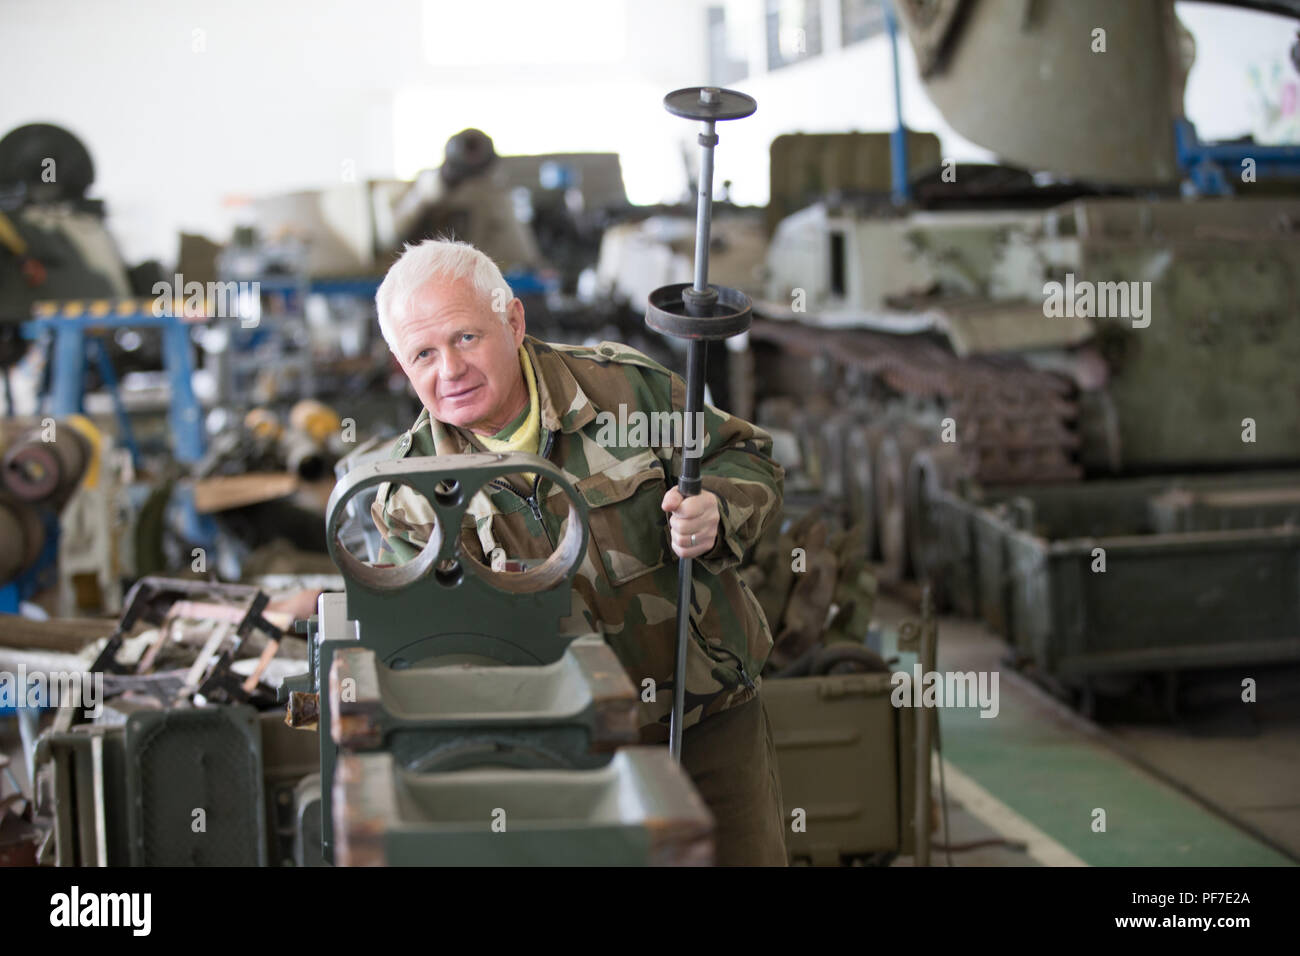 Russia, Bryansk, April 27, 2018. Military factory.Adjustment and maintenance of military tanks and equipment Stock Photo